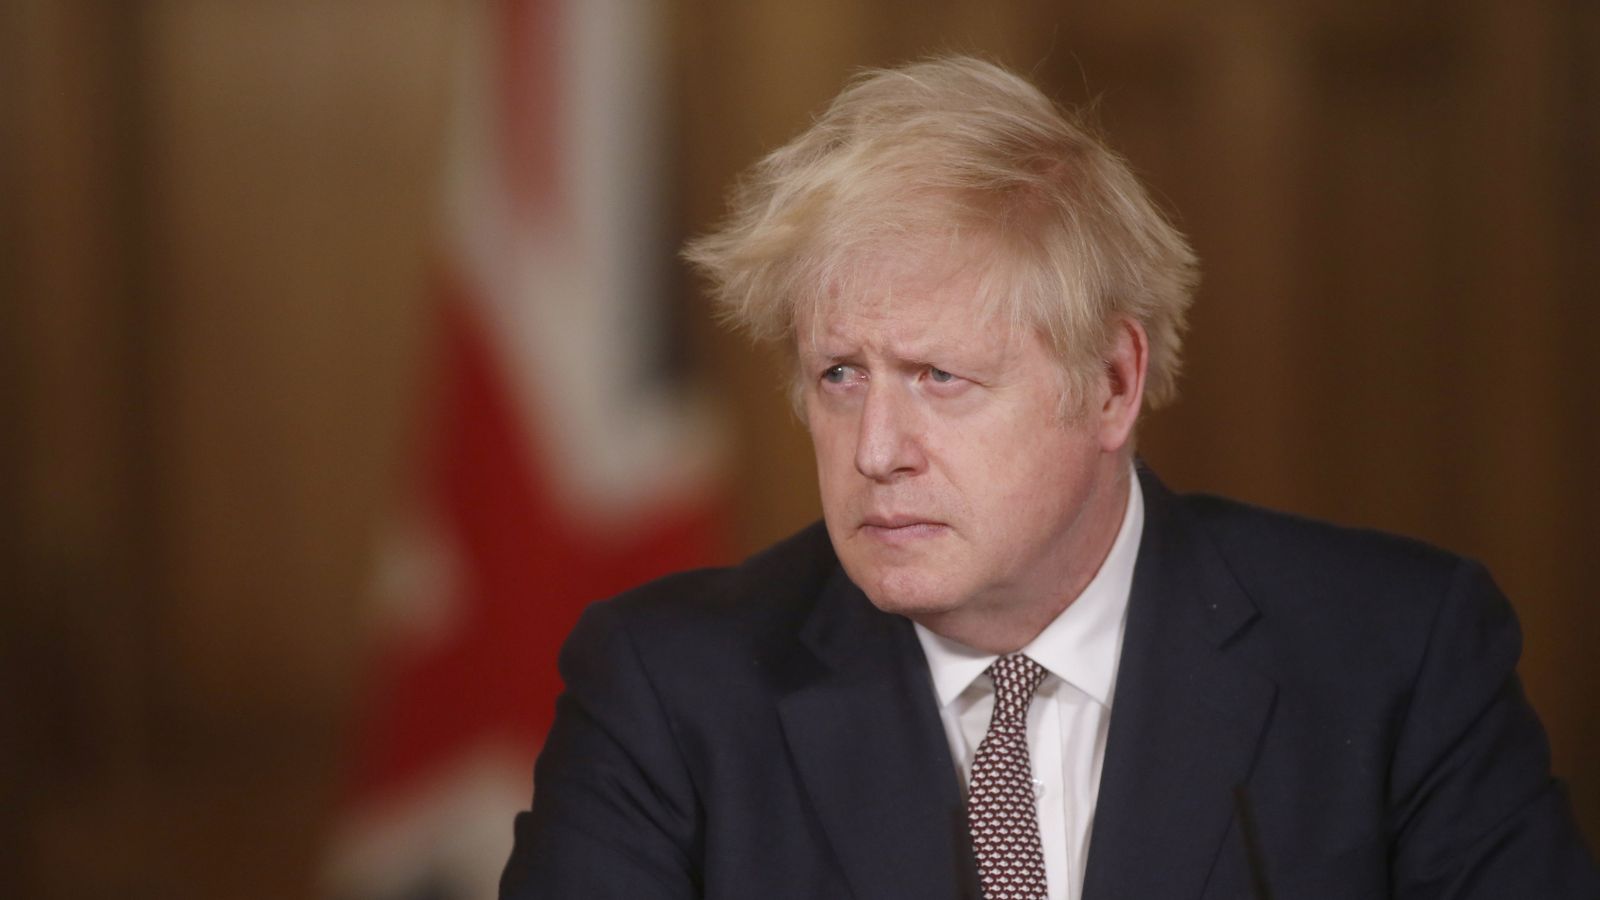 Govt-19: Restricted restrictions on Tory MPs say ‘February 3 should be sunset’ Boris Johnson |  political news